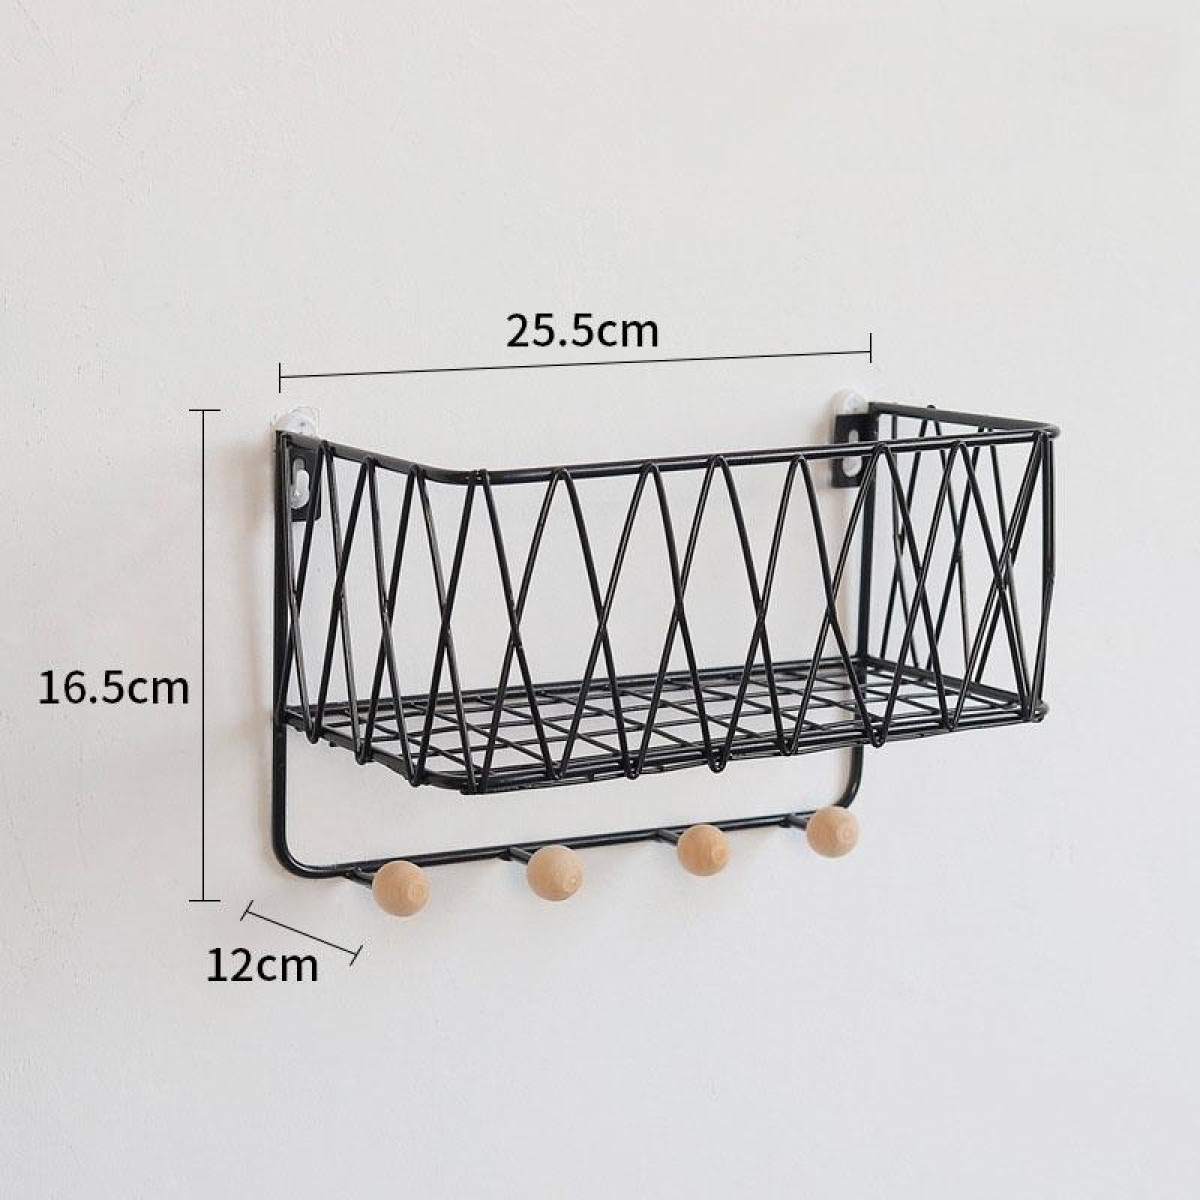 Wall Hook Rack Home Wall Decoration Creative Multifunctional Partition Wrought Iron Rack, Size:Small(Black)